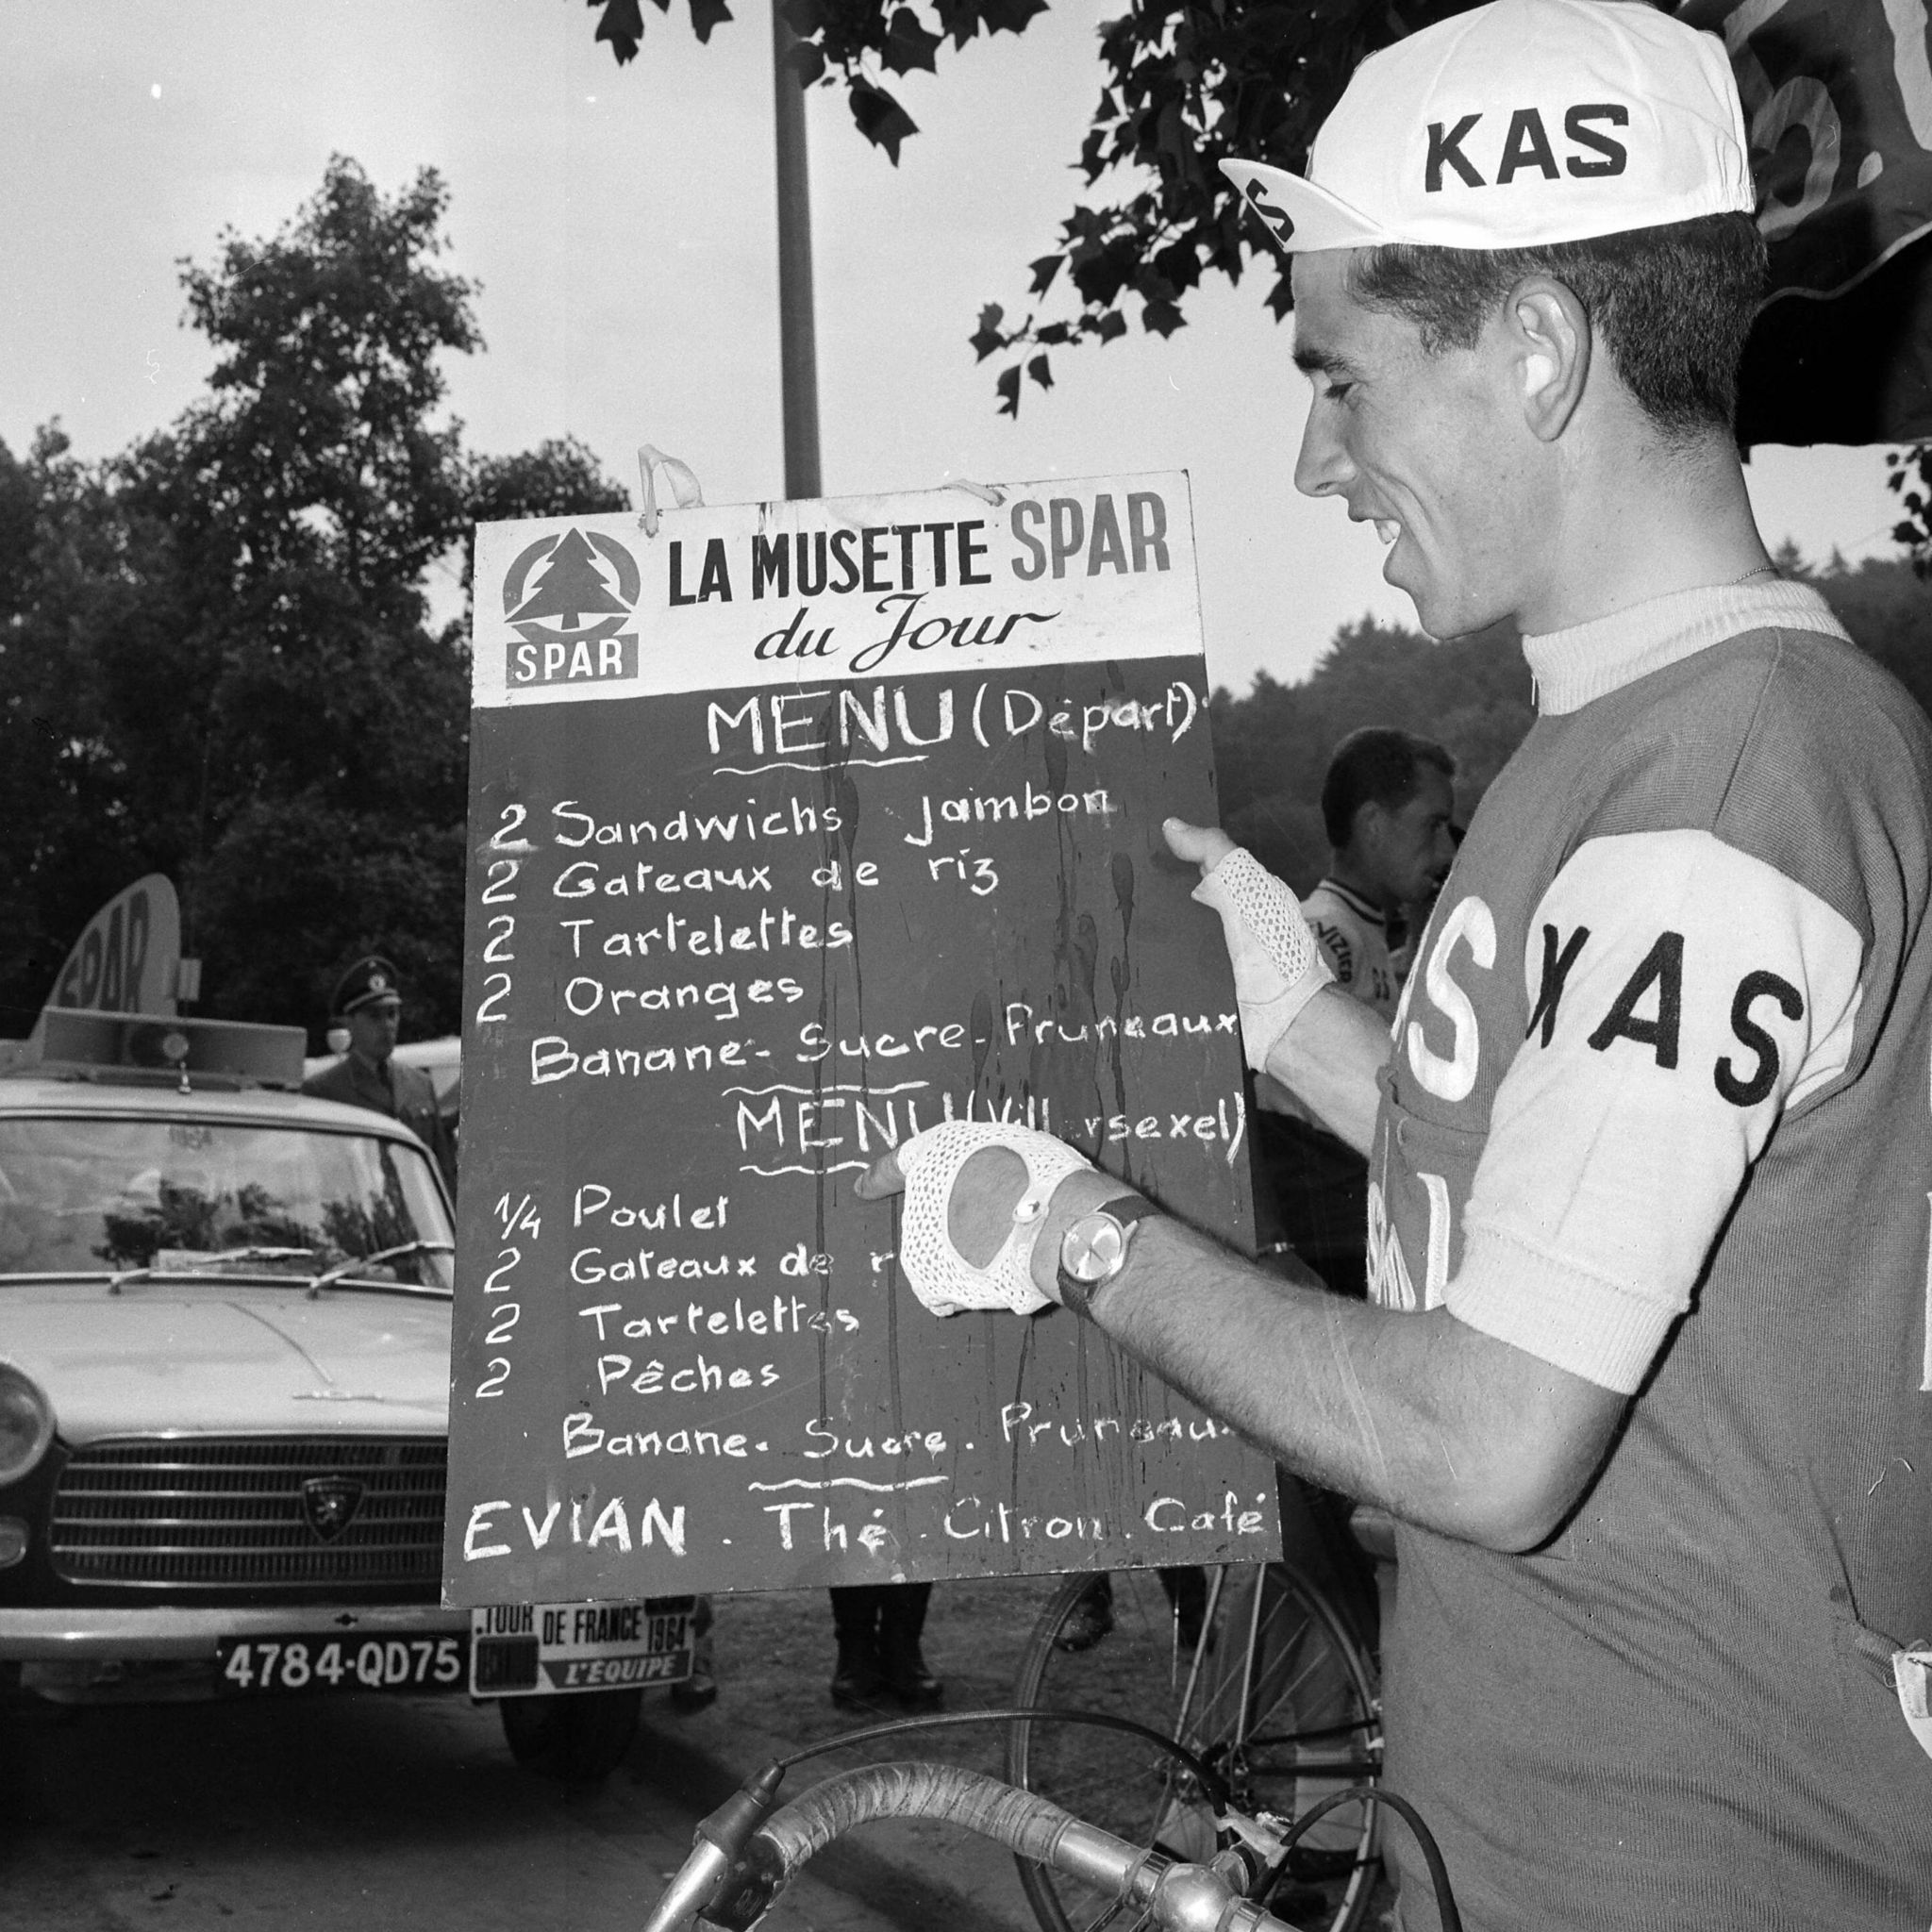 A Tour de France rider examines a blackboard of food options at the 1964 Tour